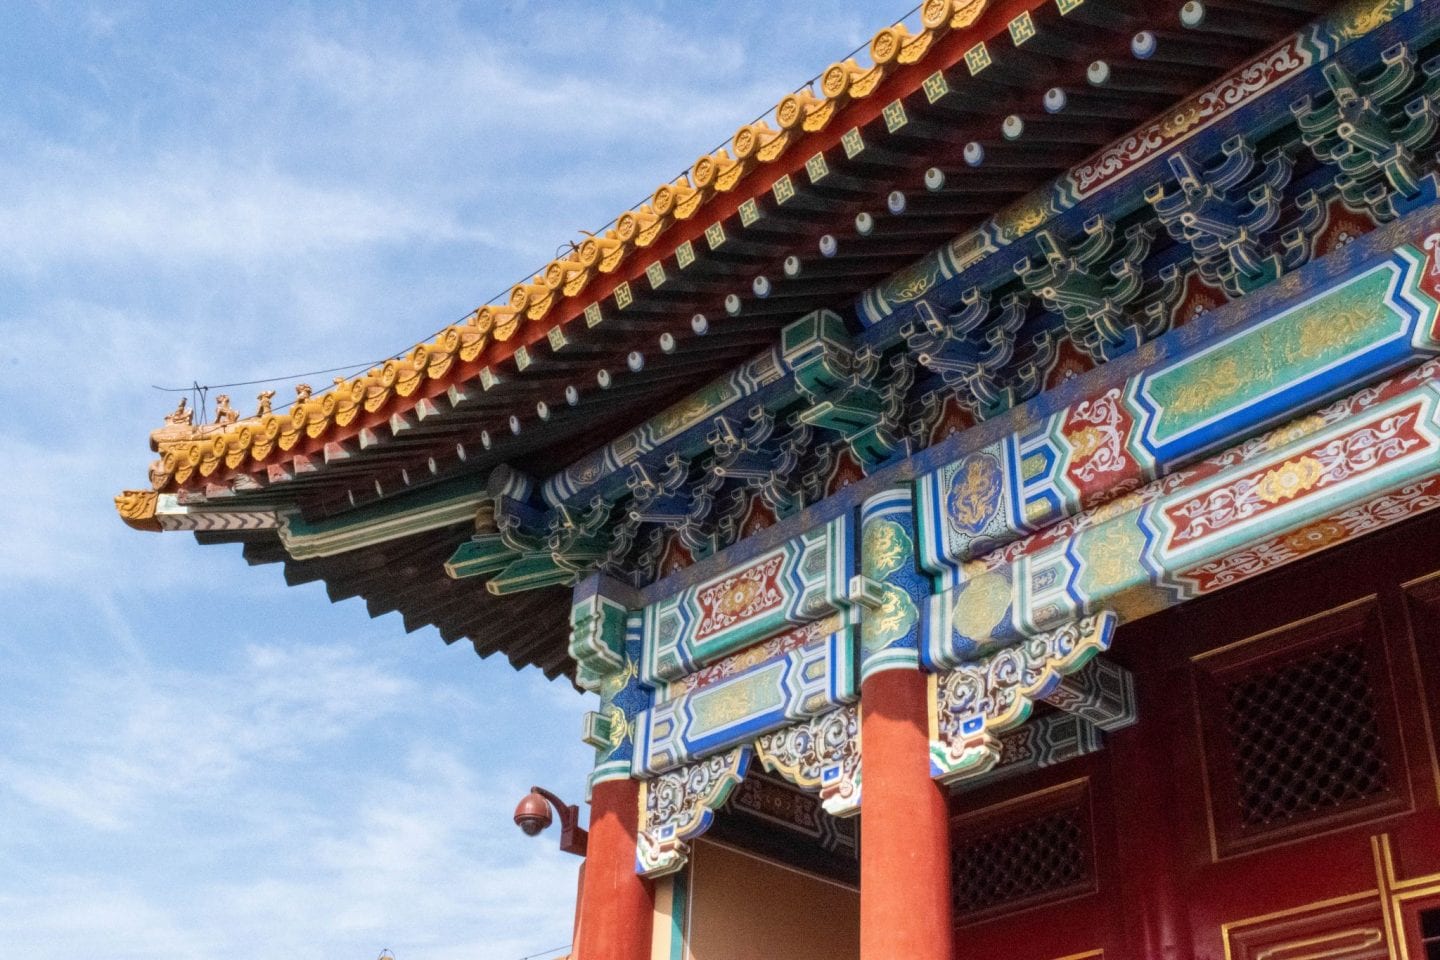 Close up photo of the Forbidden Palace in Beijing with blue skies